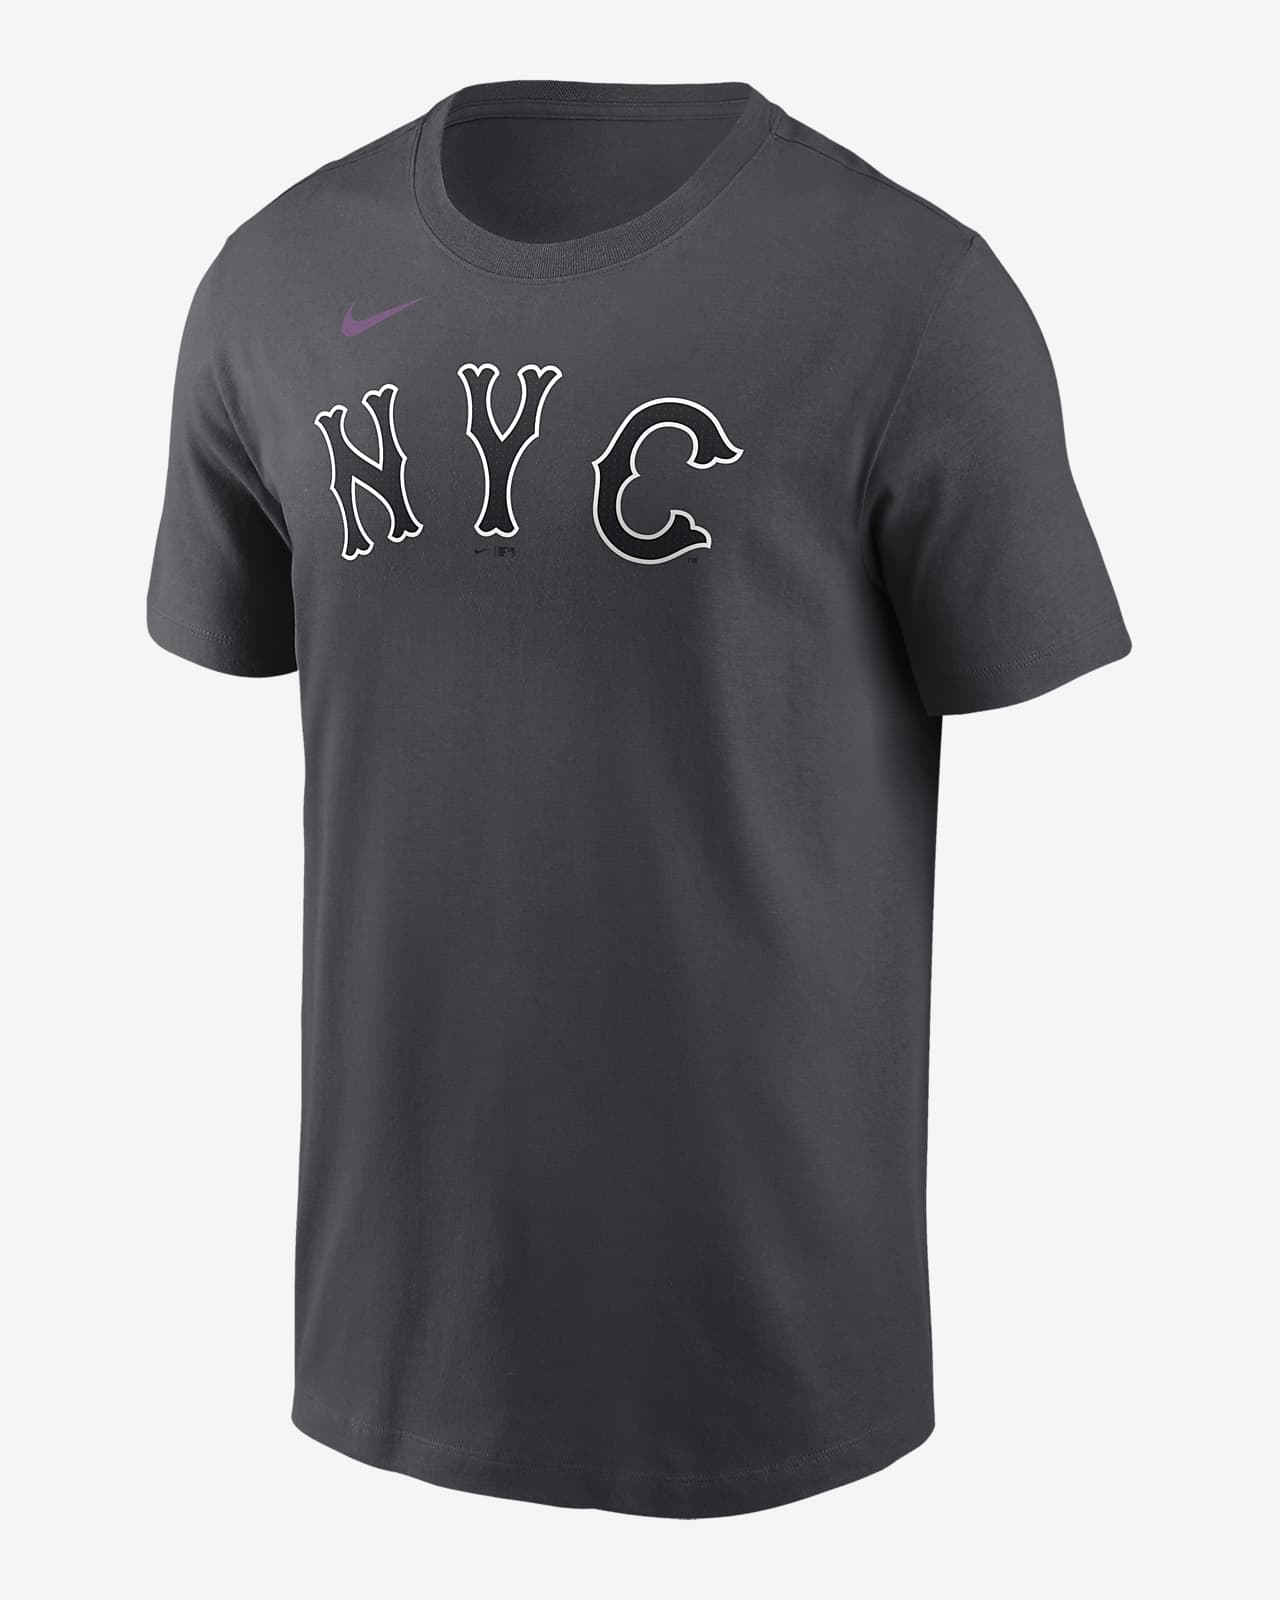 Pete Alonso New York Mets City Connect Fuse Men's Nike MLB T-Shirt